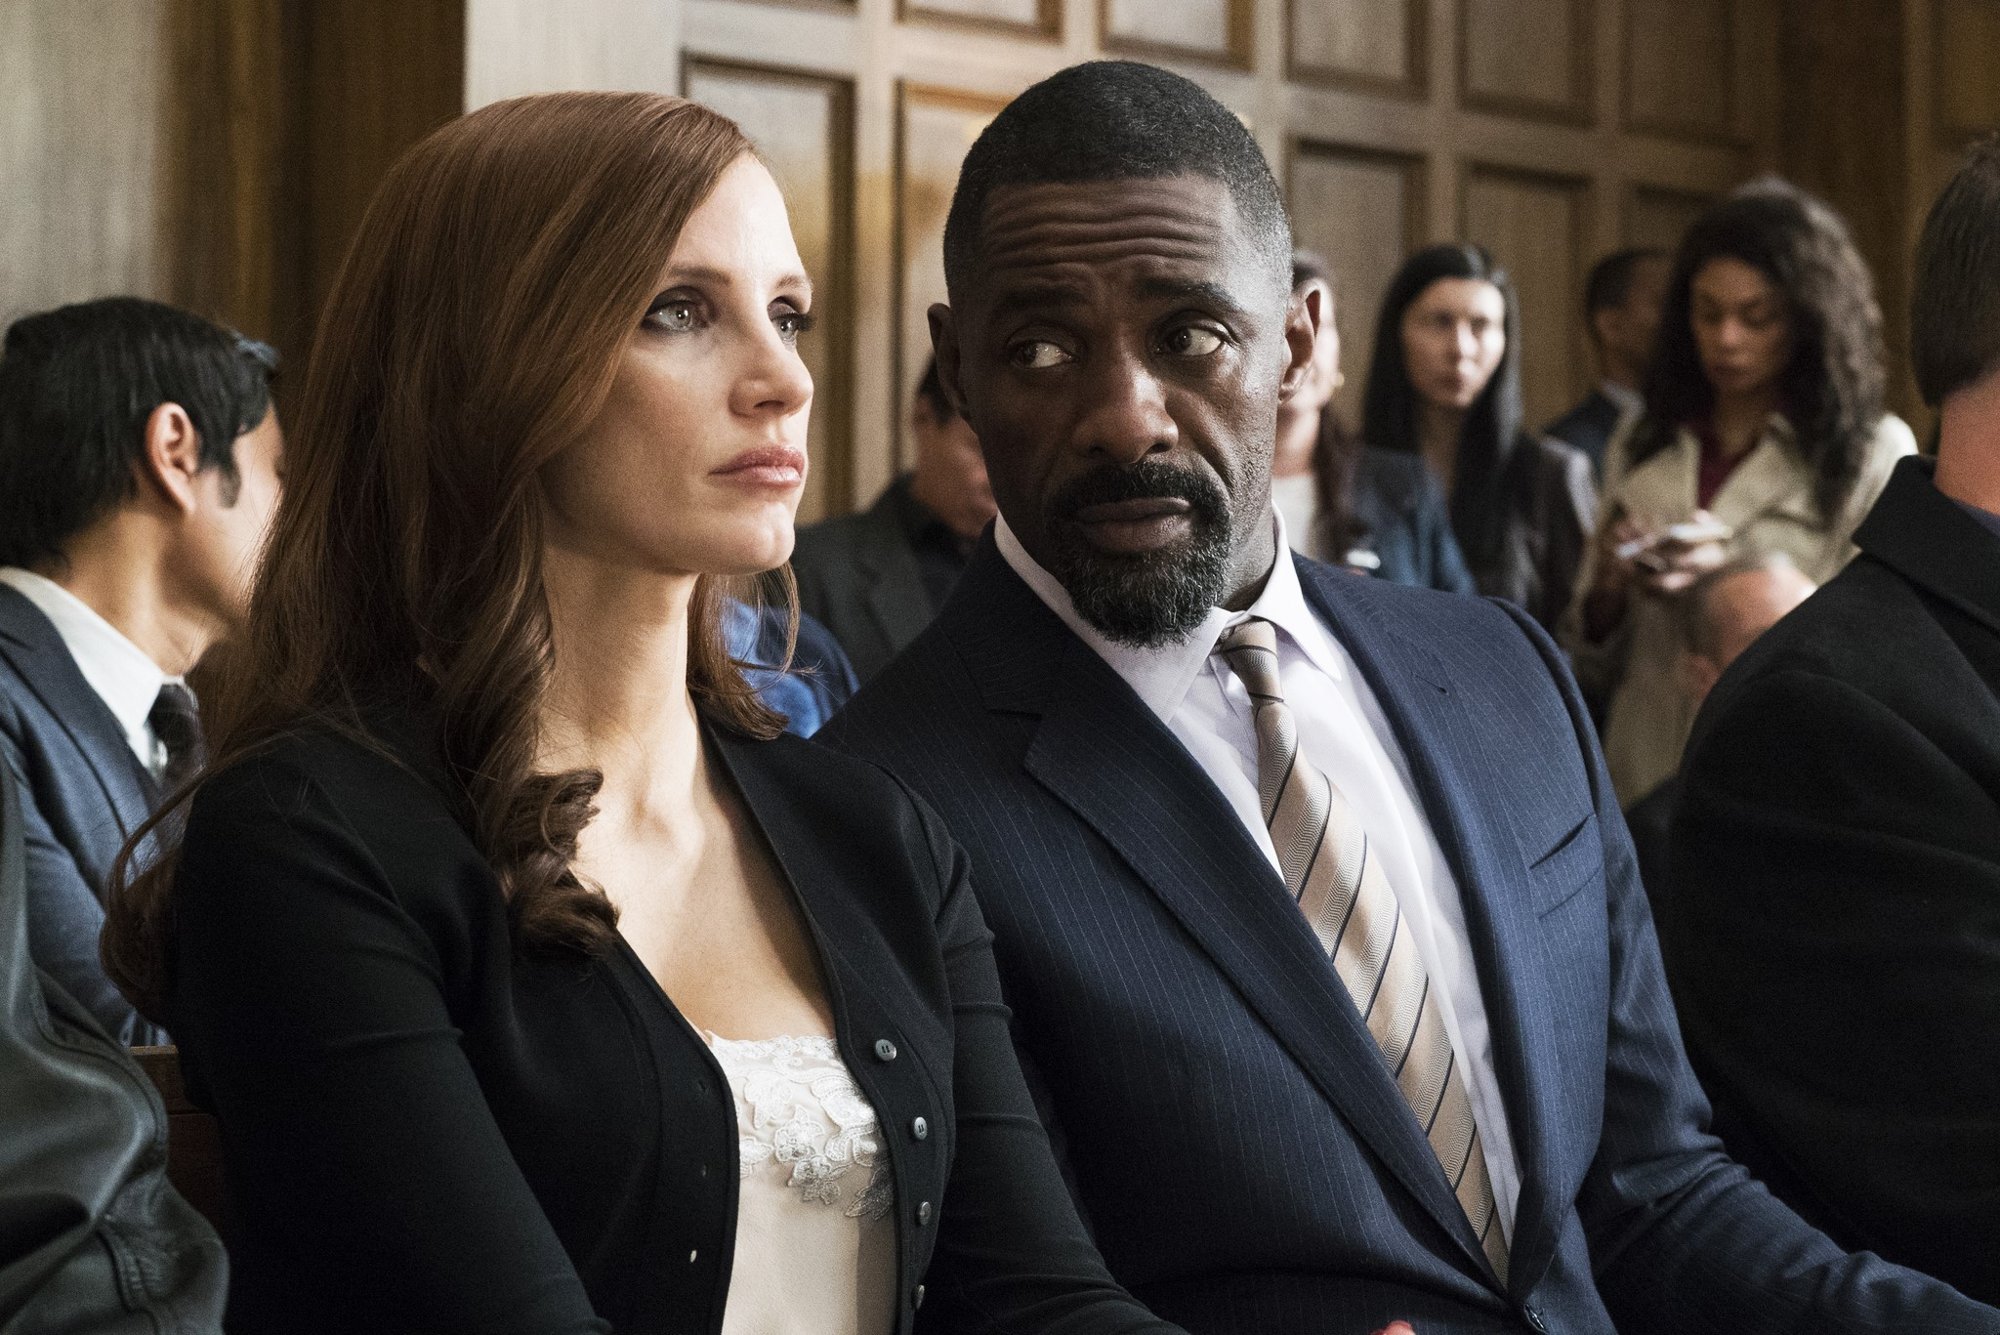 Jessica Chastain (Molly Bloom) and Idris Elba in STX Entertainment's Molly's Game (2017)